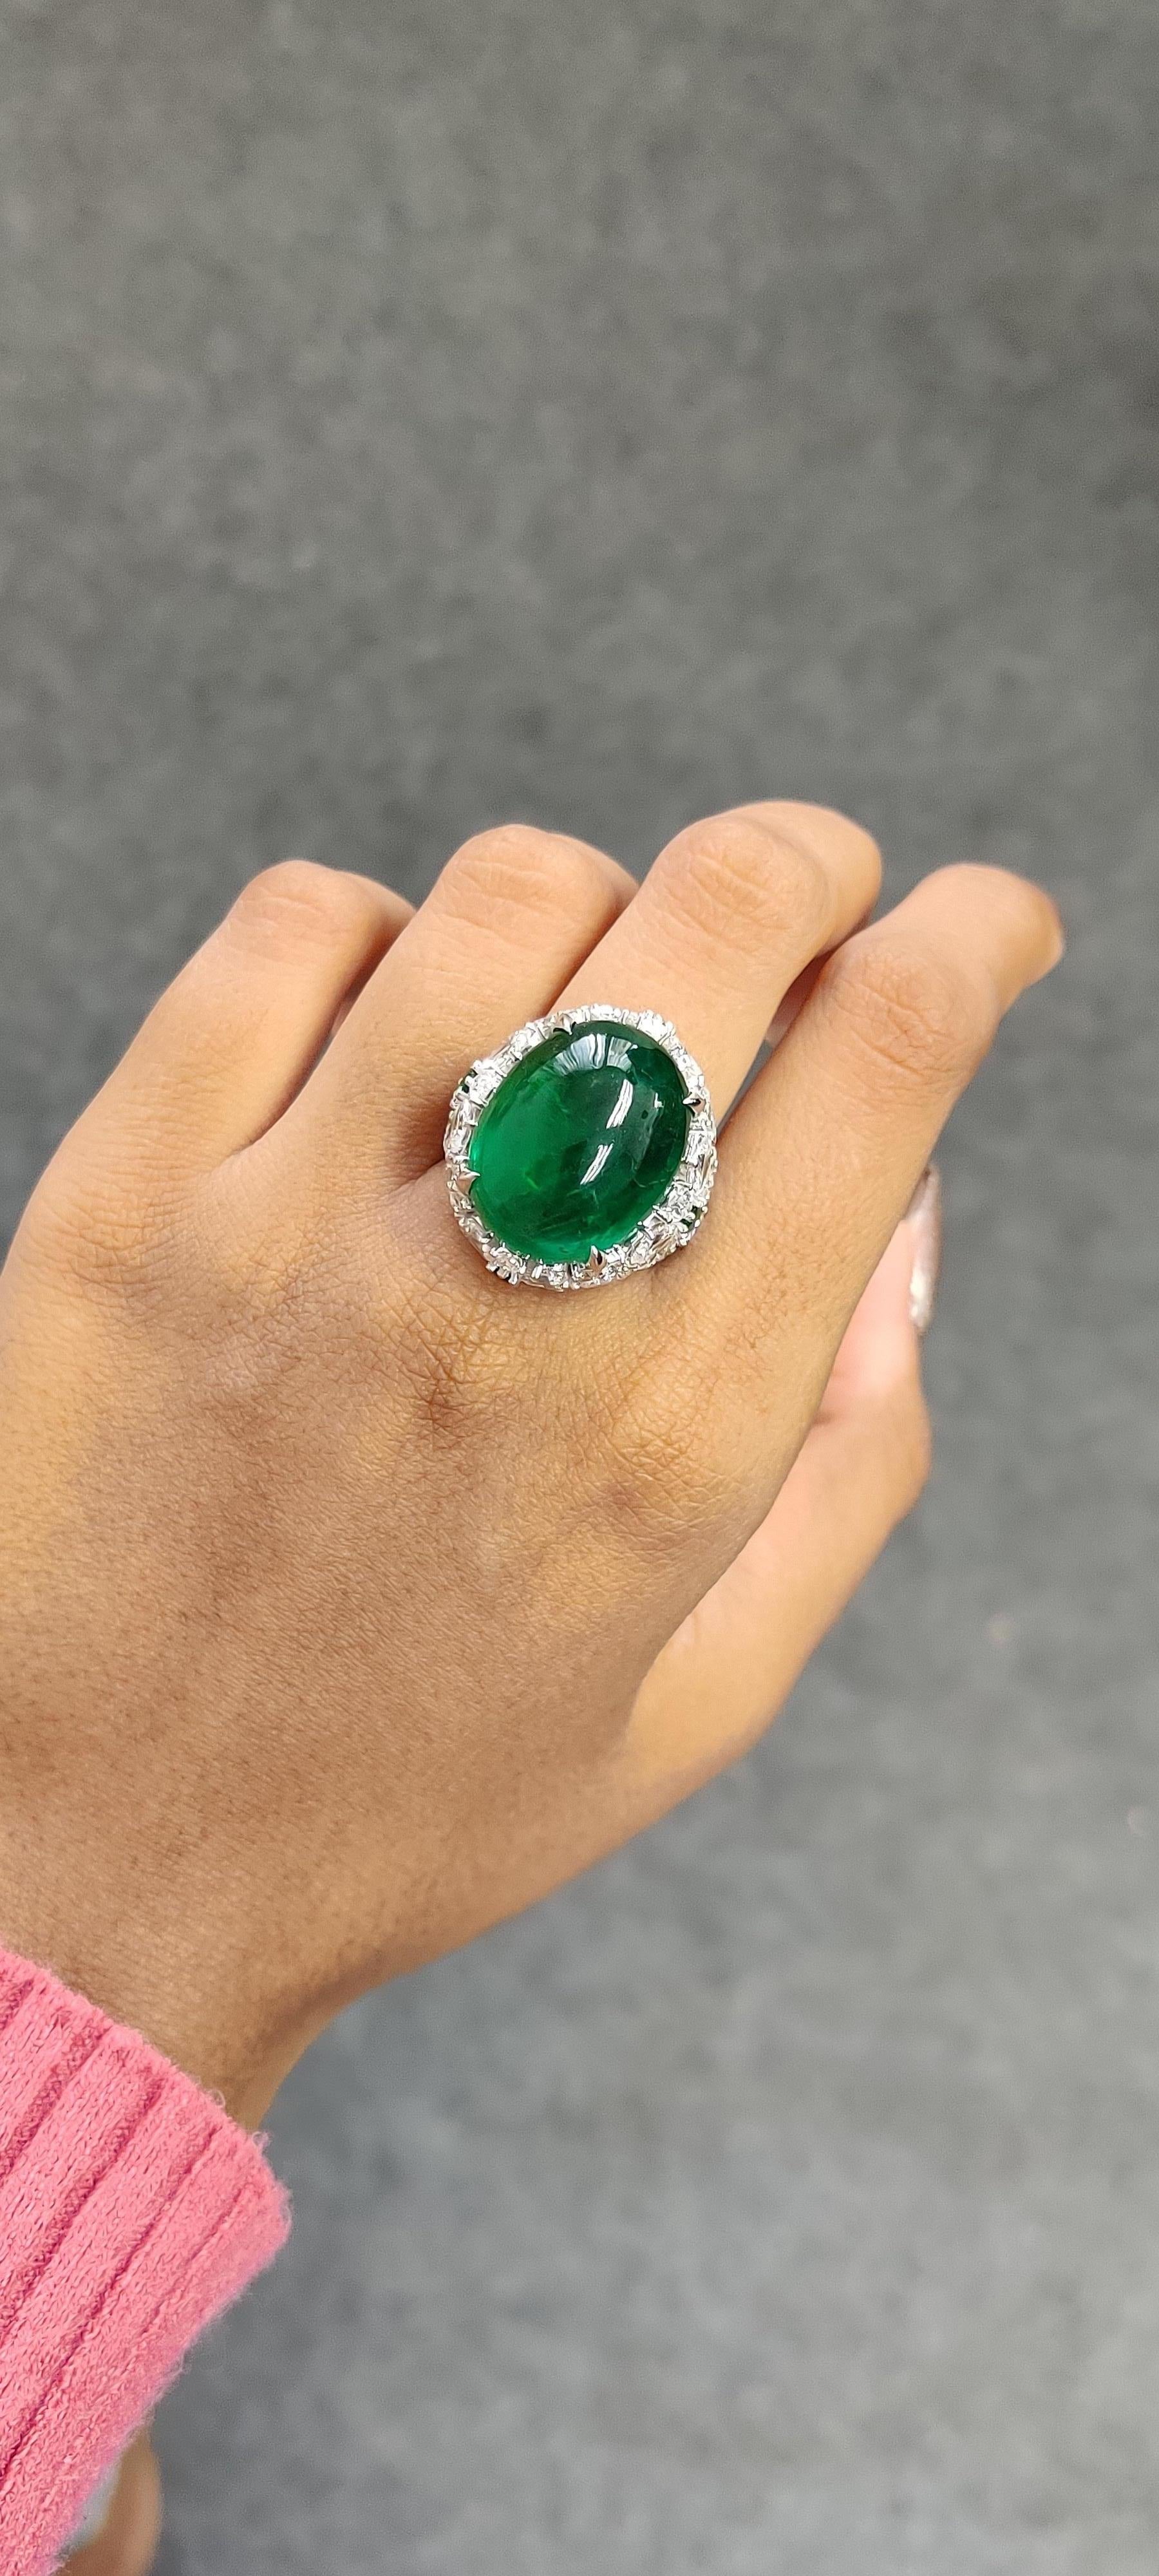 24.60 Carat Cabochon Emerald Art Deco Inspired One-of-a-kind Statement Ring For Sale 3